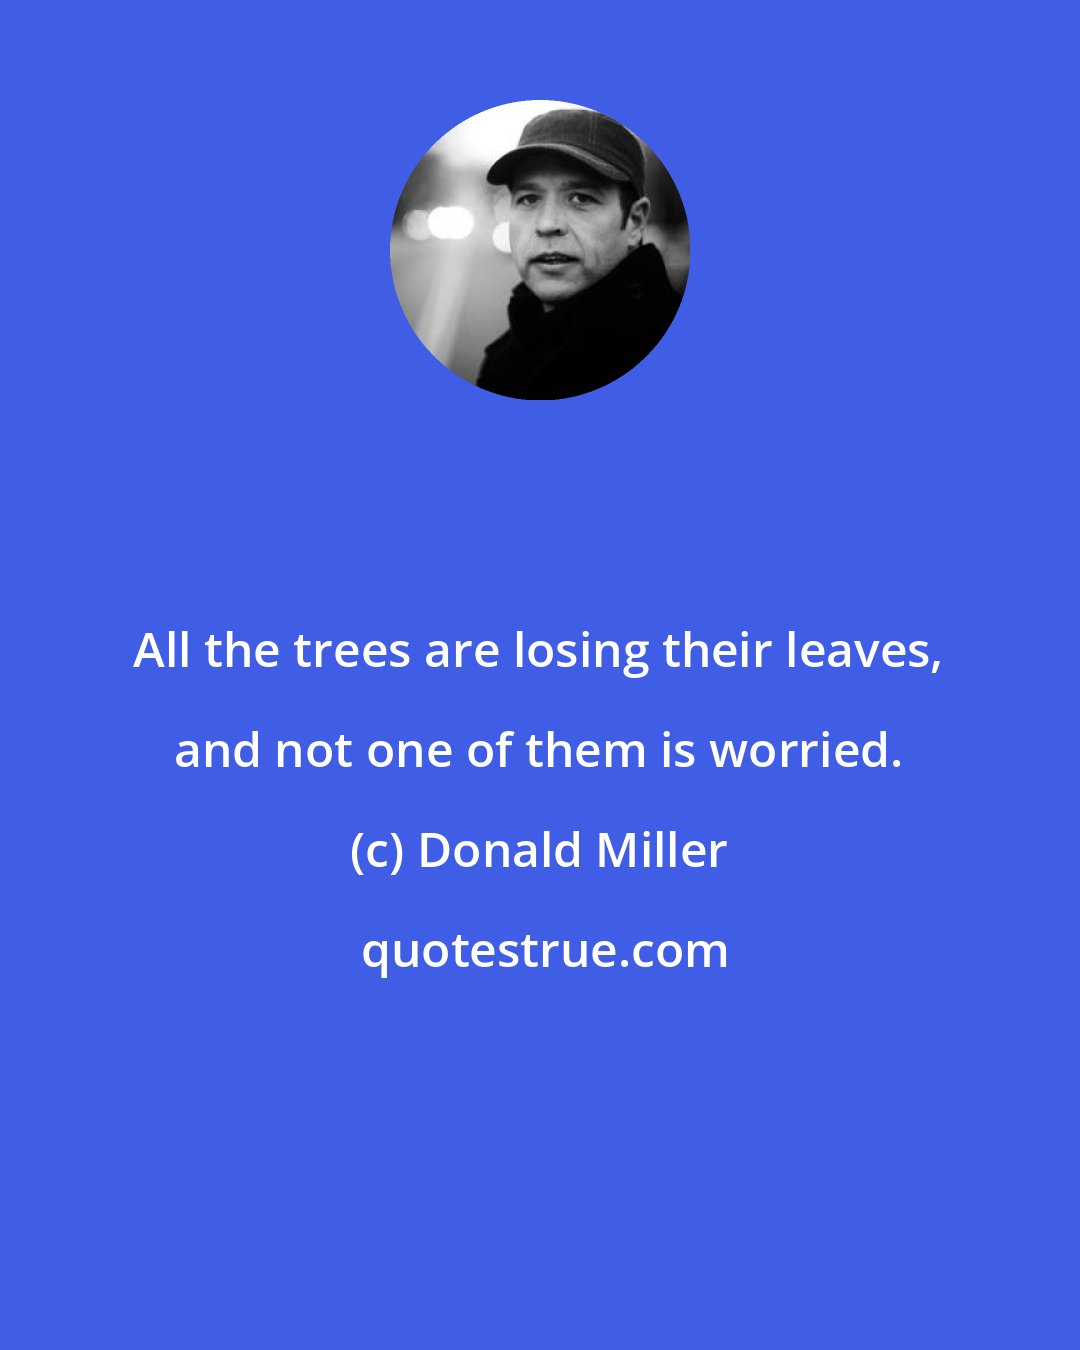 Donald Miller: All the trees are losing their leaves, and not one of them is worried.